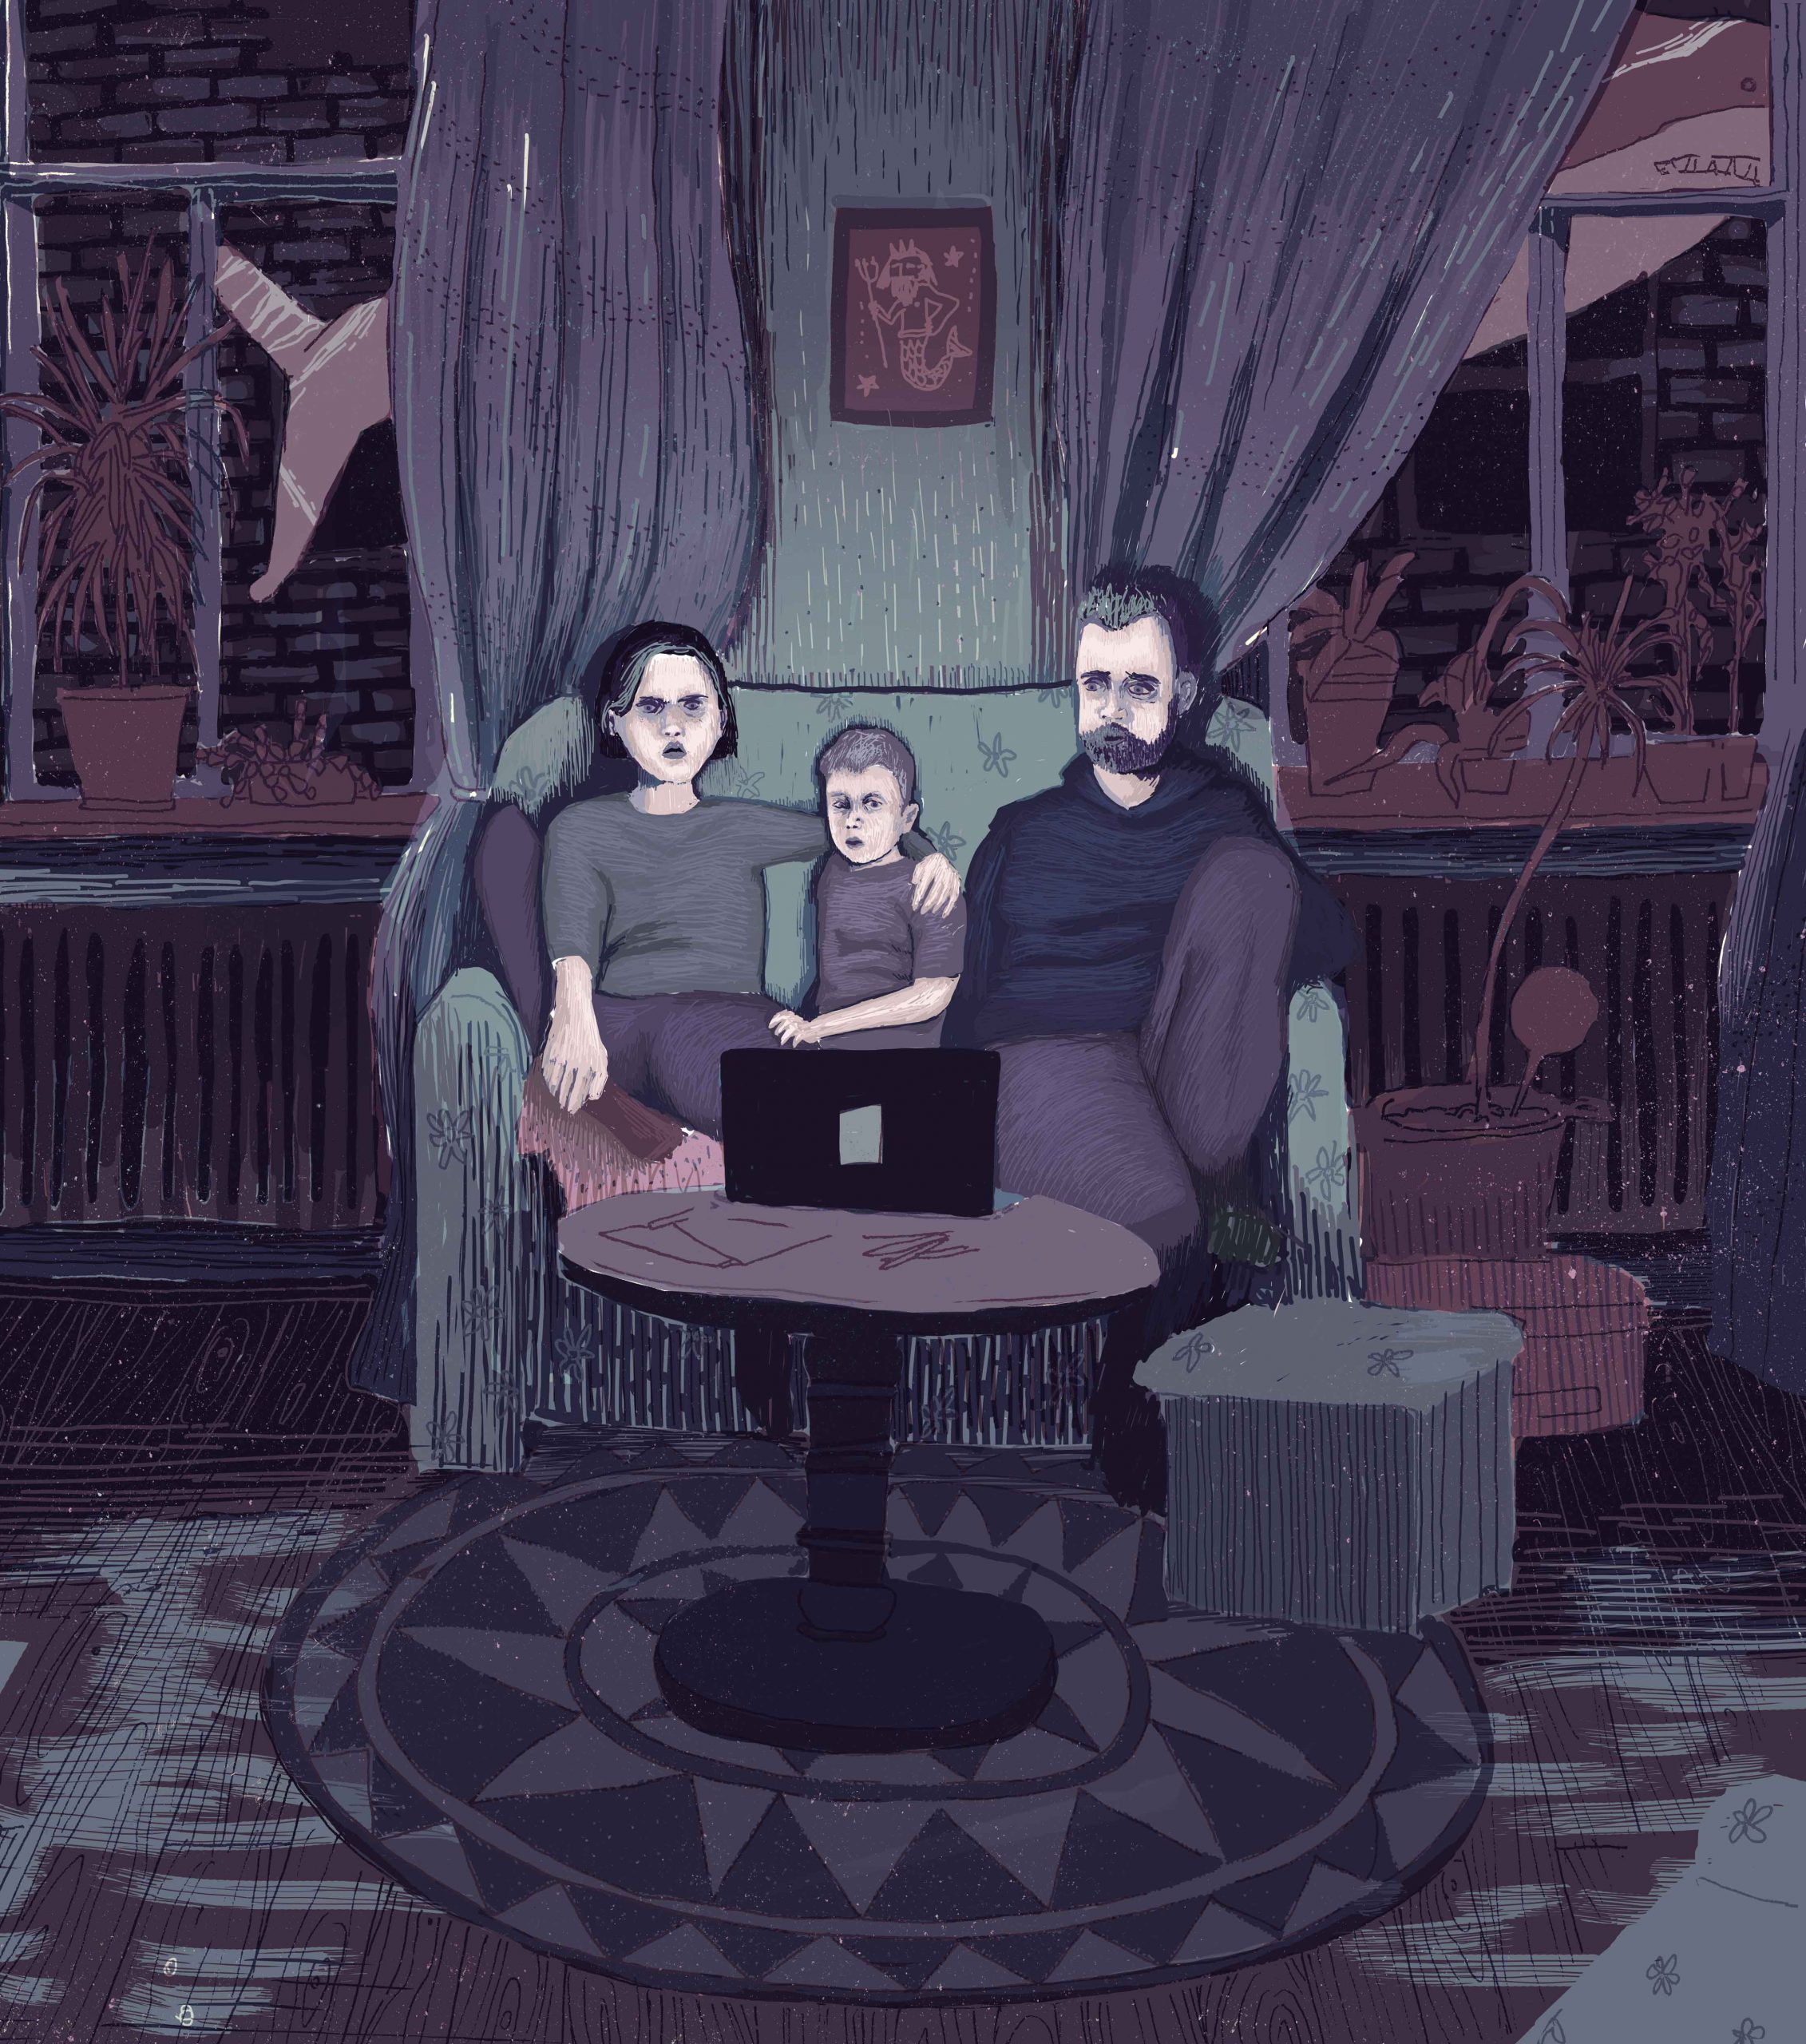 Watching – Digital Illustration. A Family watching something on a netbook. The Only source of light is the screen.